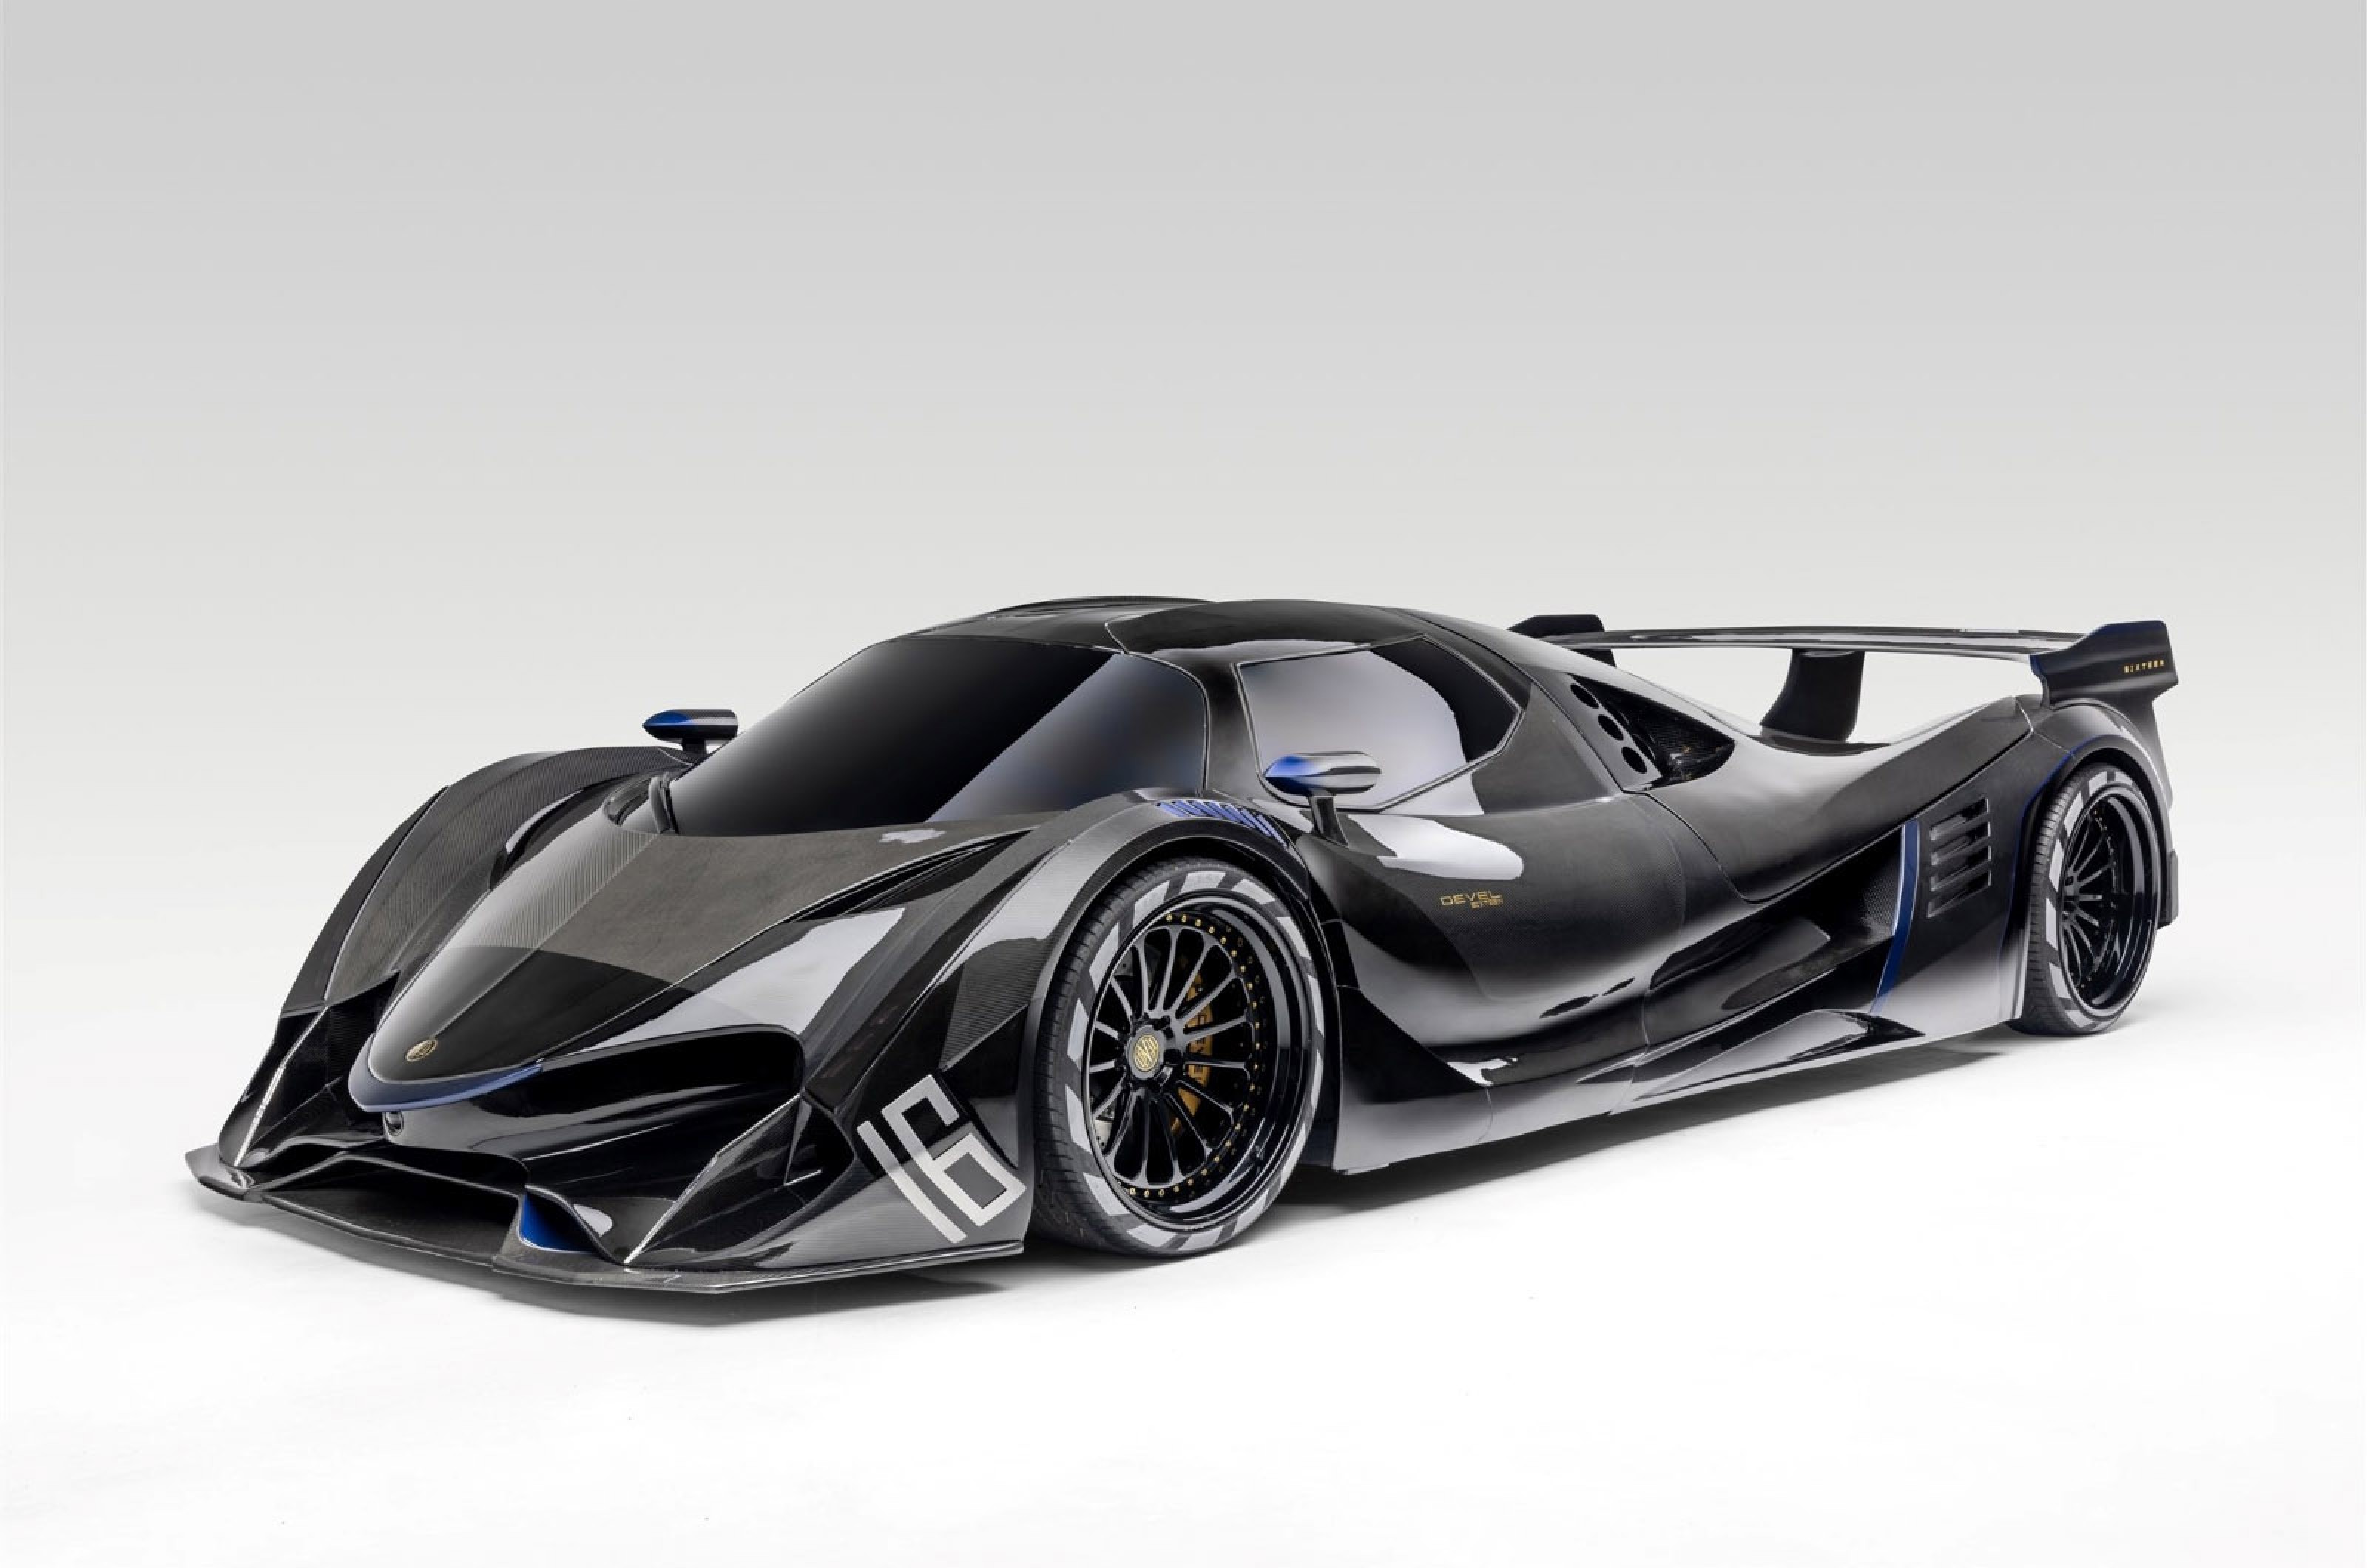 <p>UAE-based Devel Motors claimed in 2017 that its Sixteen would be the world’s fastest production car, with a top speed of 364mph and 0-60mph acceleration of 1.6 secs.</p>  <p>The range-topper was set to have a quad-turbo, 12.3-litre V16 with 4939bhp and 3757lb ft torque.</p>  <p>However, to date, only one V8-powered Sixteen has been produced.</p>